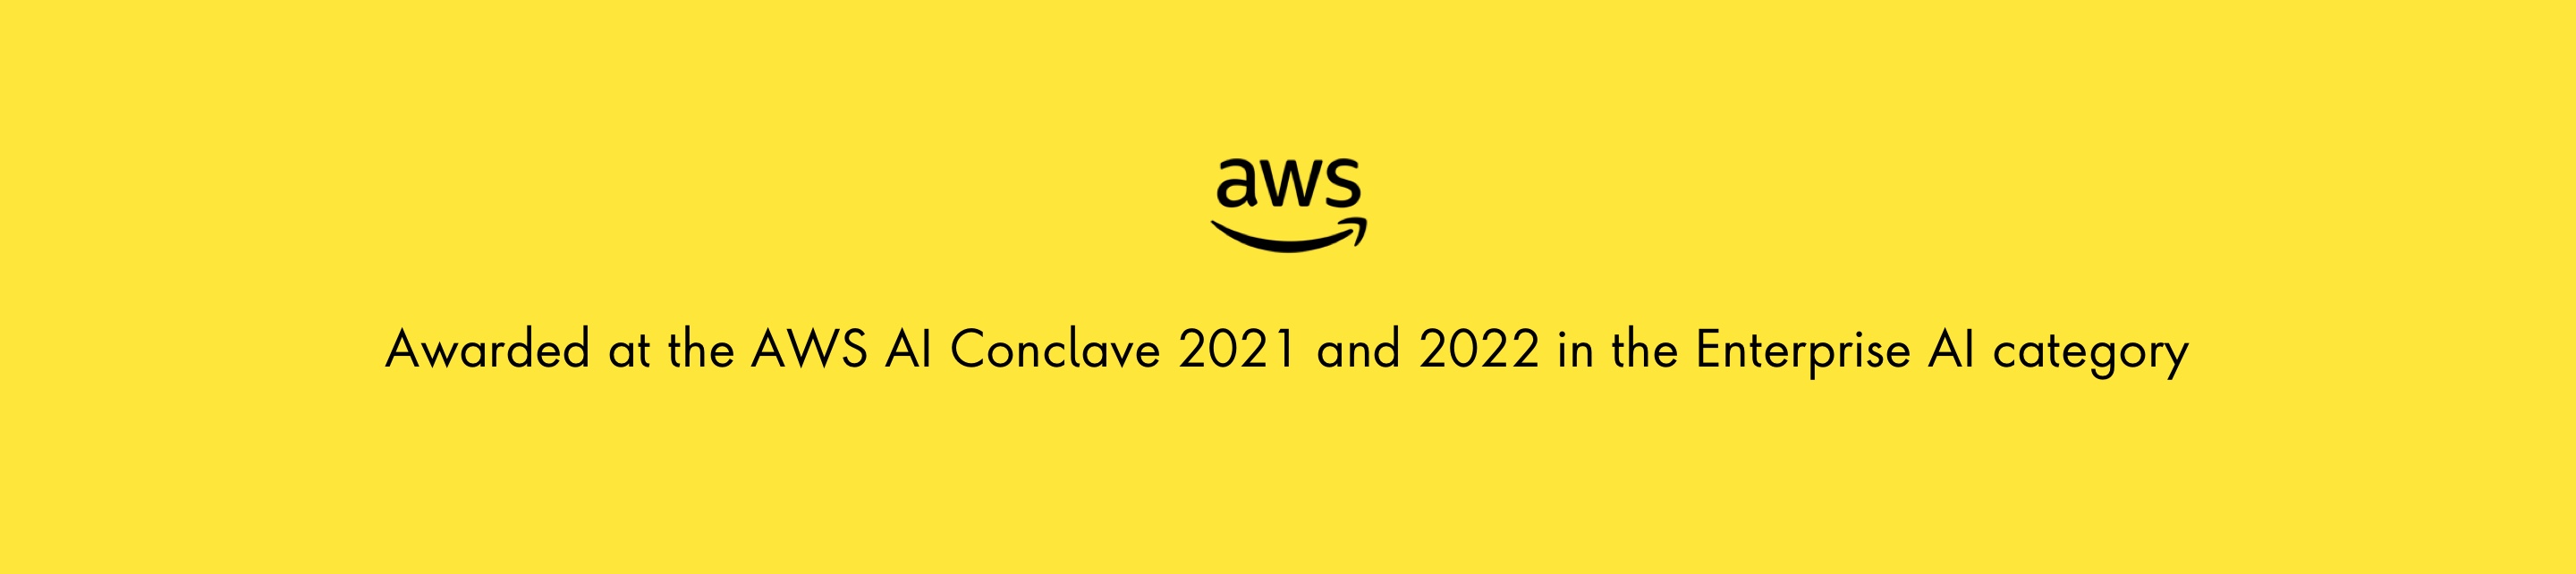 AWS logo, Awarded at the AWS AI Conclave 2021 and 2022 in the Enterprise AI category